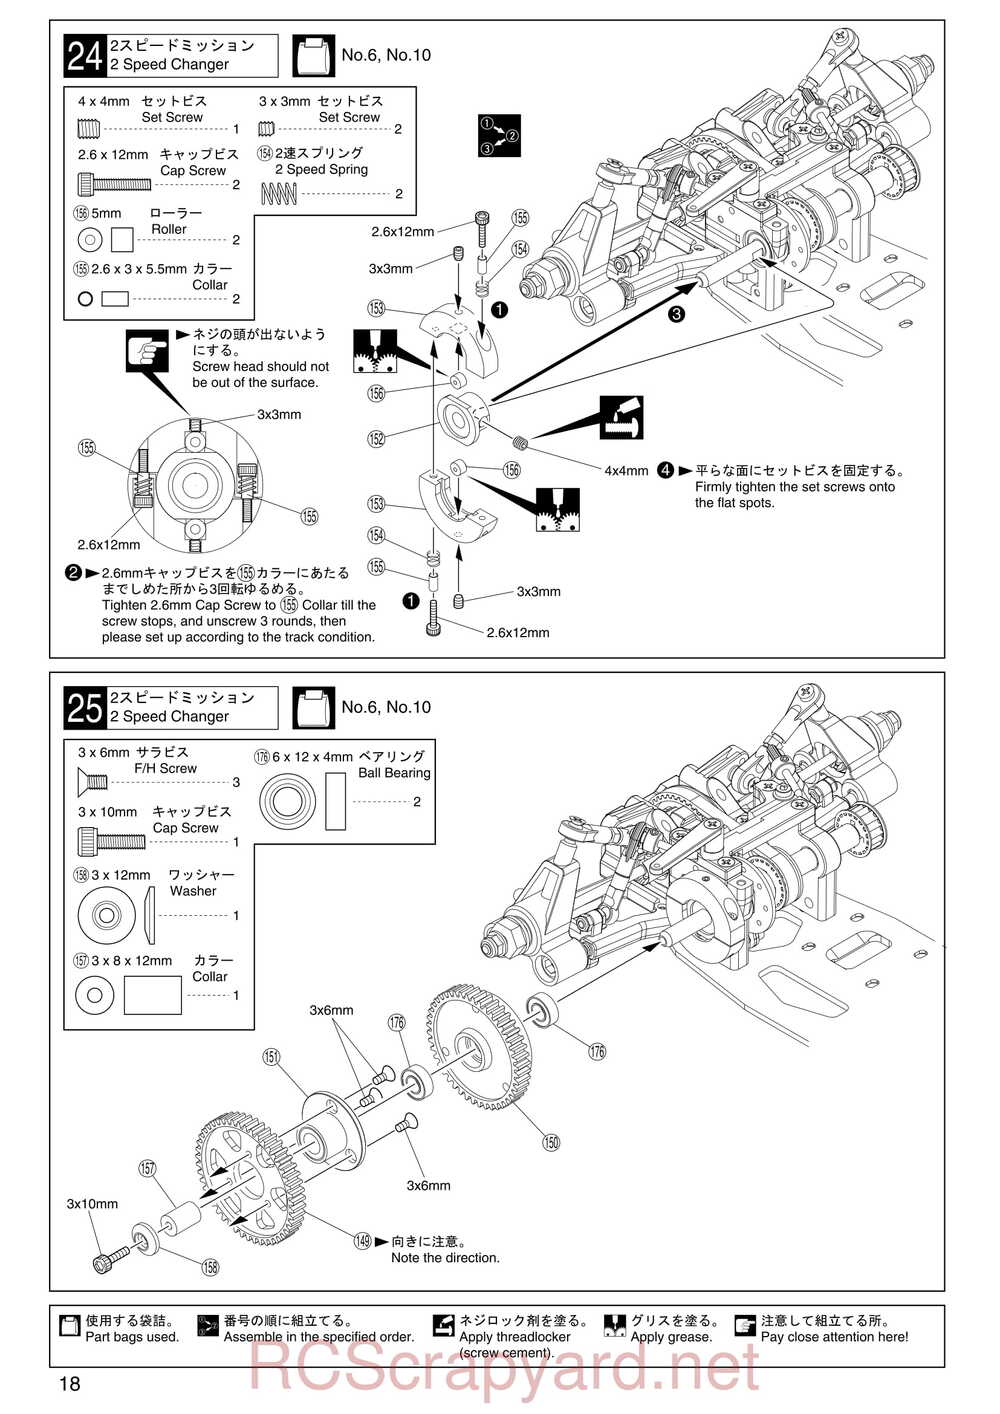 Kyosho - 31257 - V-One RRR Rubber - Manual - Page 18